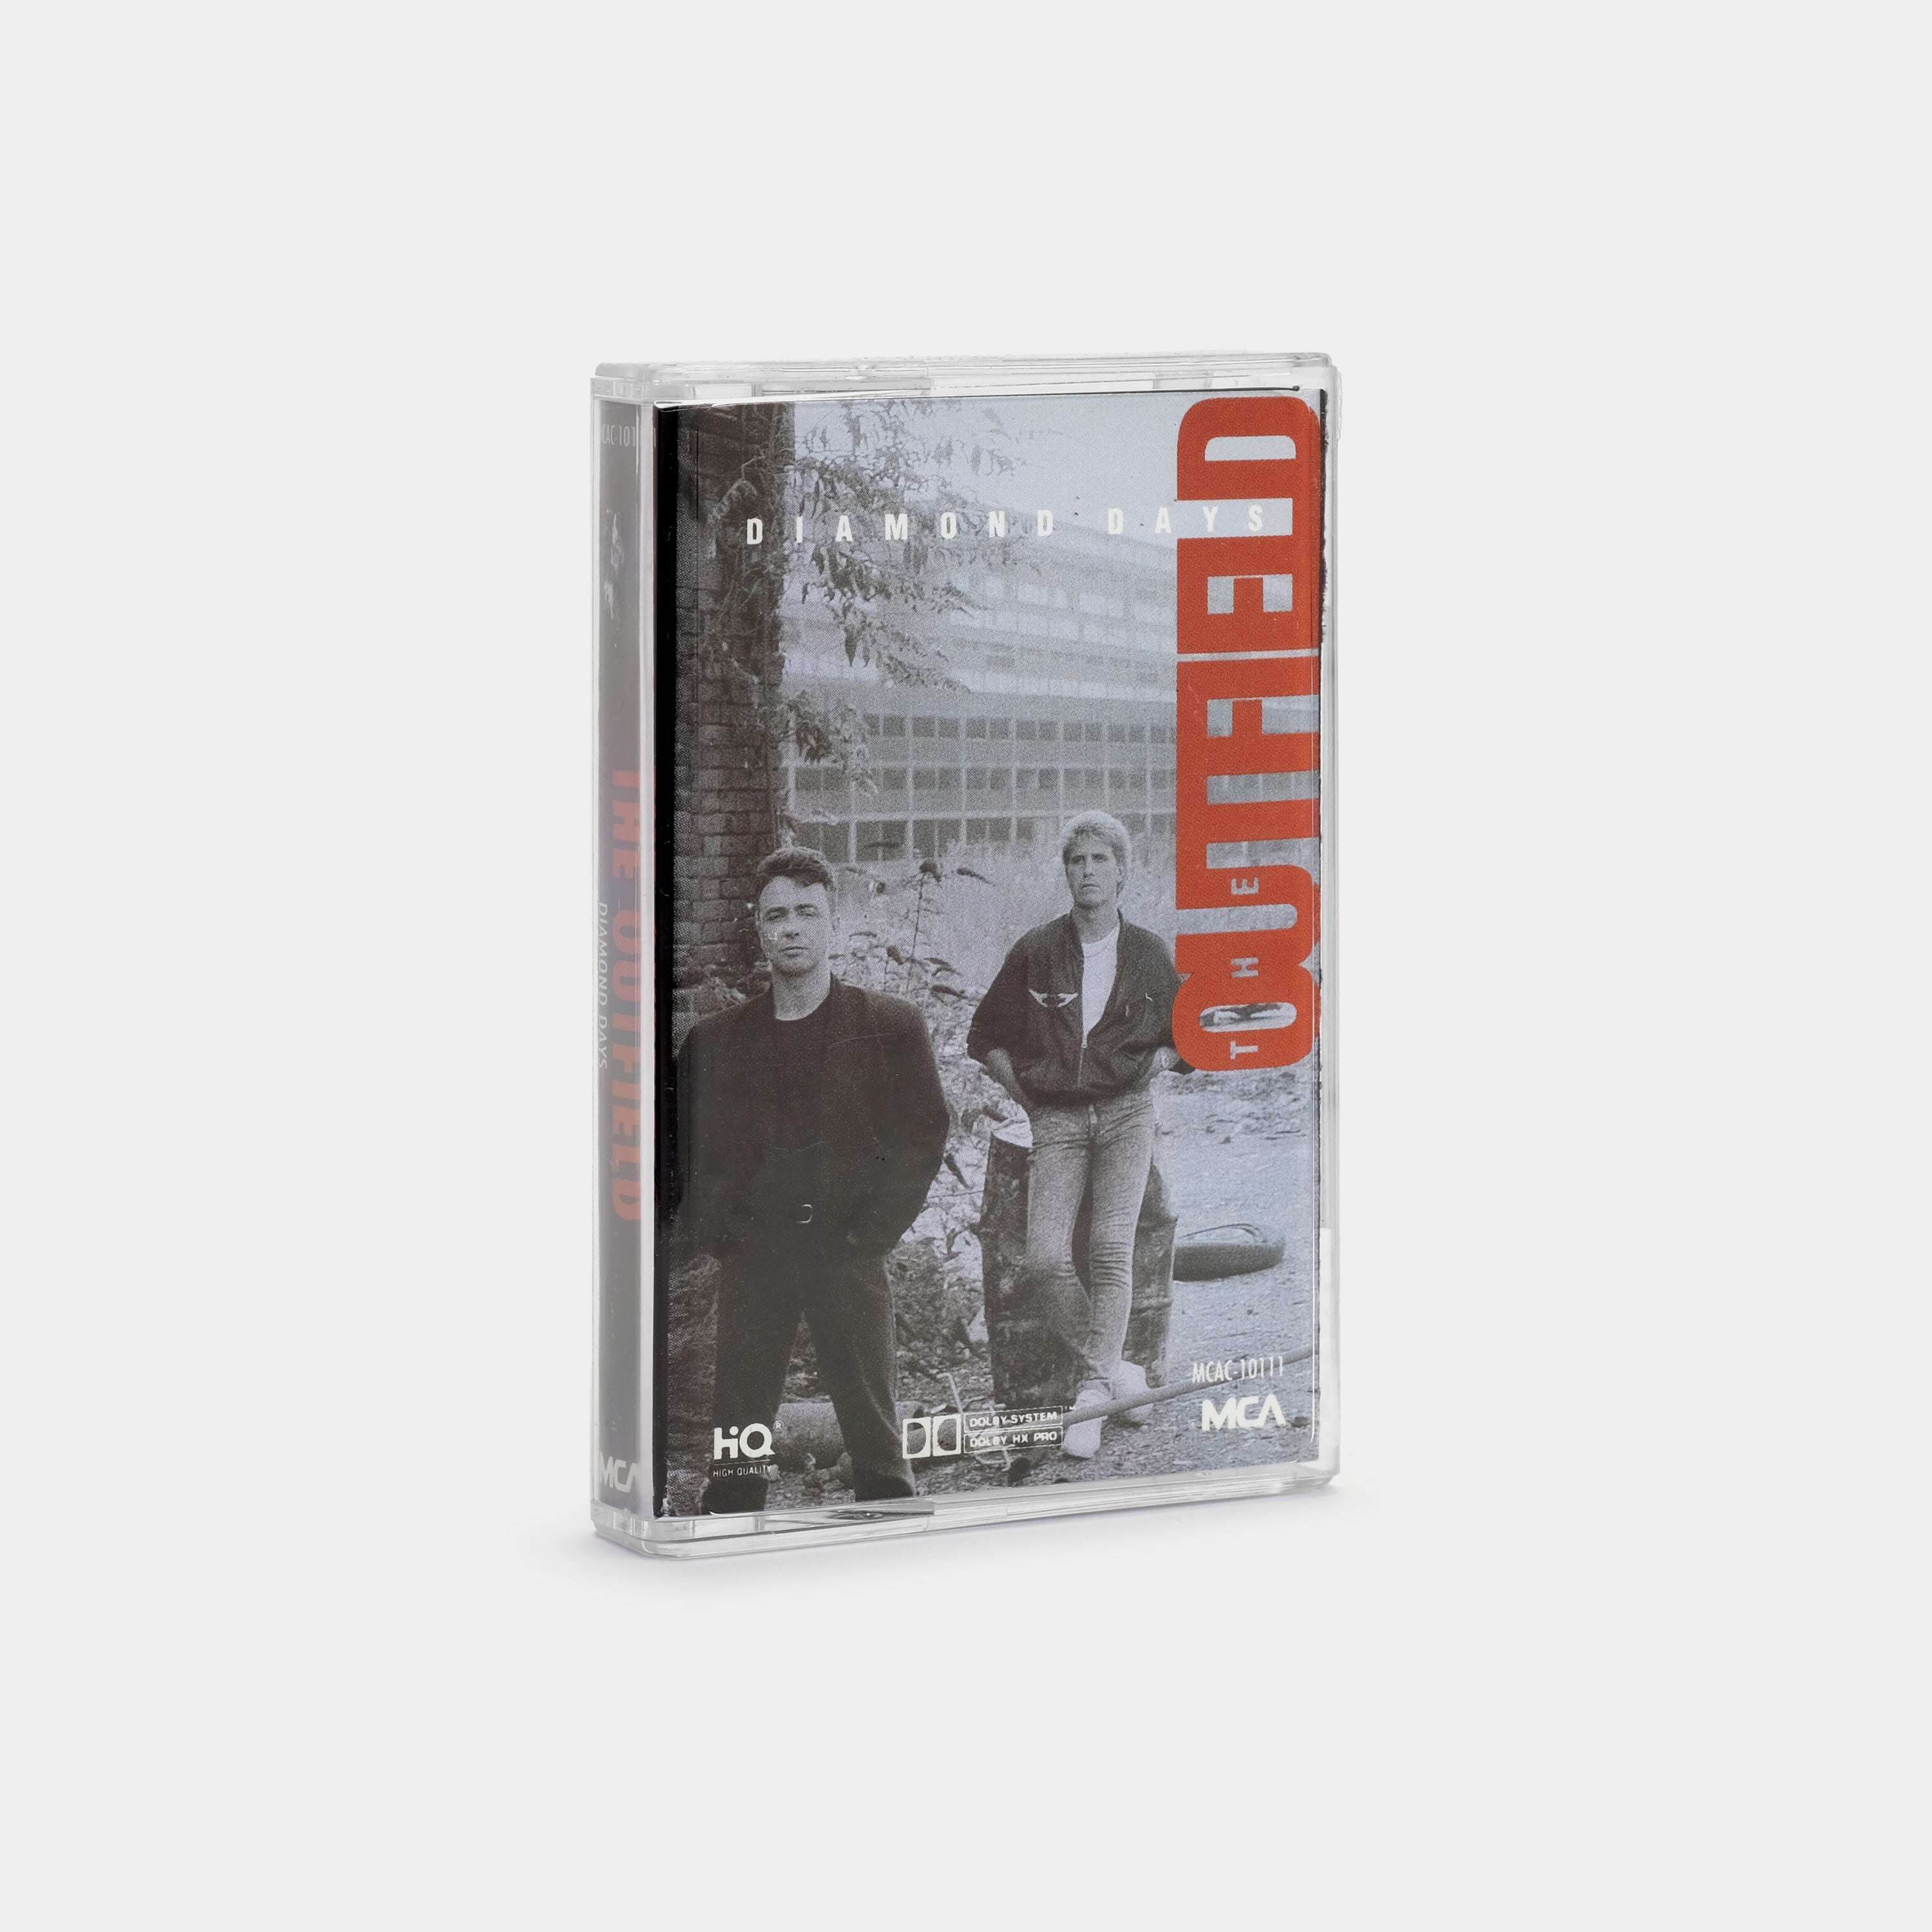 The Outfield - Diamond Days Cassette Tape